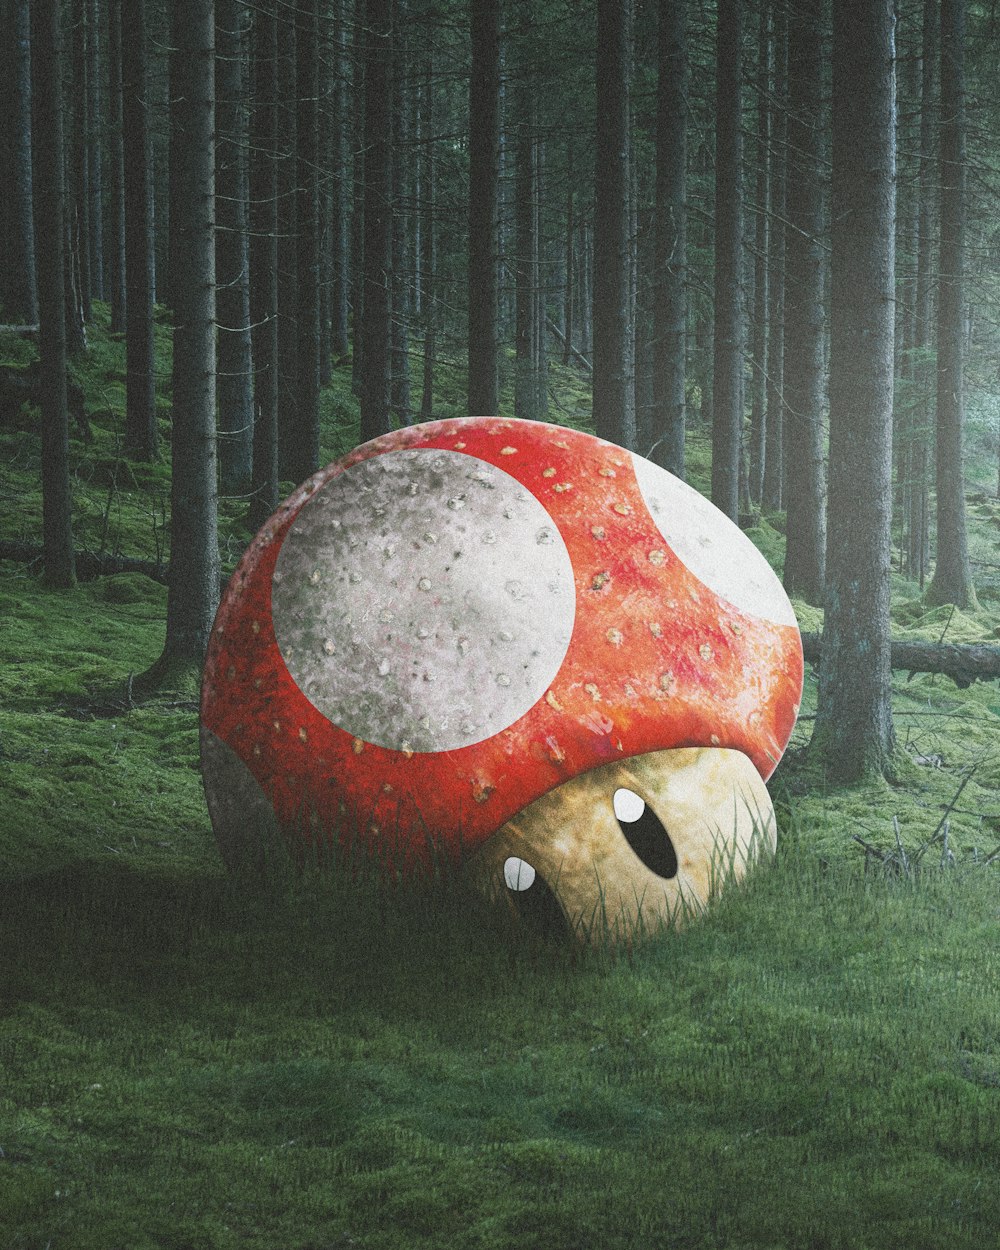 a mushroom sitting in the middle of a forest